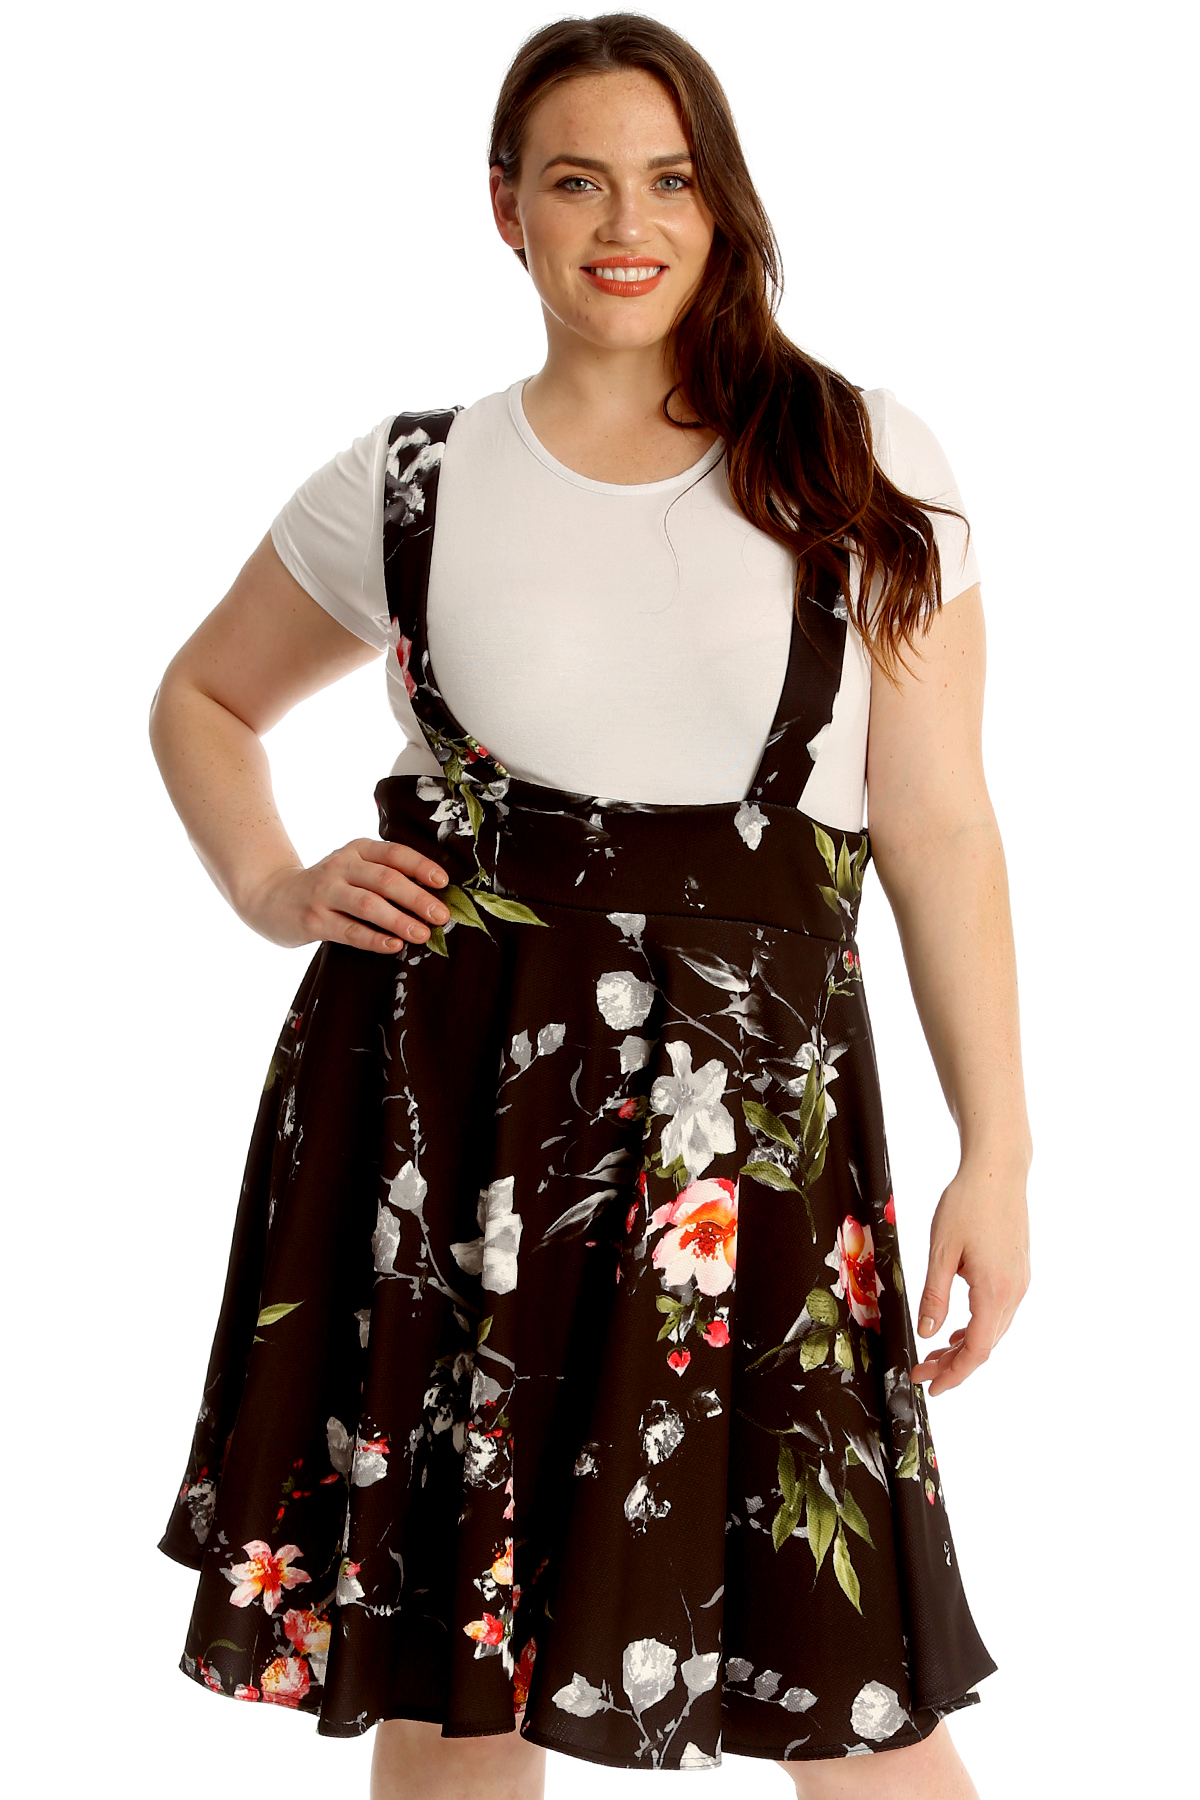 Floral Dungaree Dress Hot Sale, UP TO ...